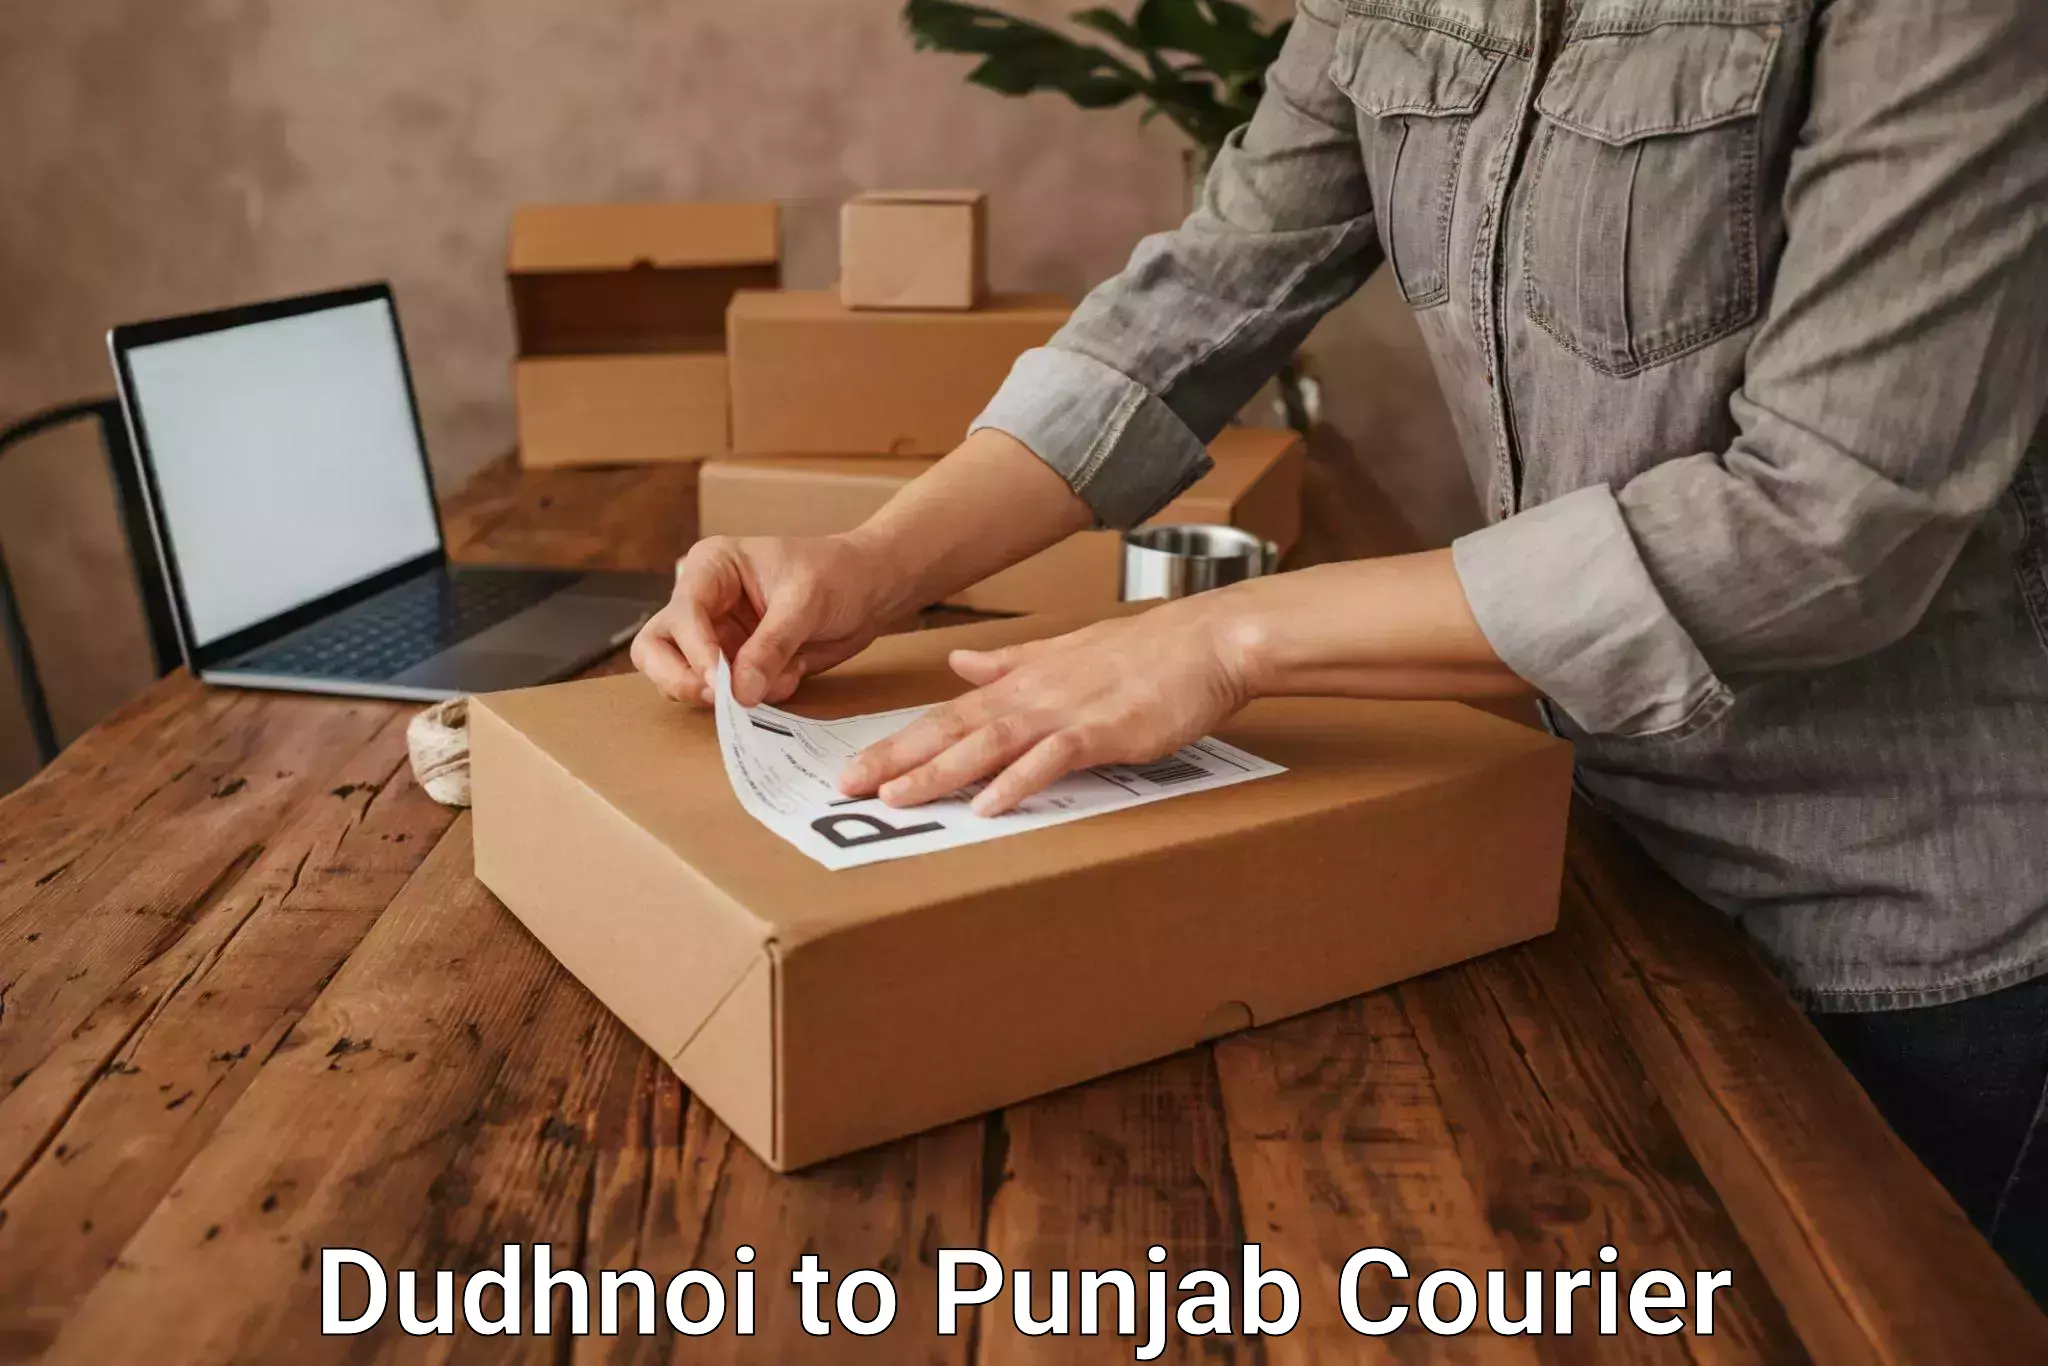 Enhanced tracking features Dudhnoi to Punjab